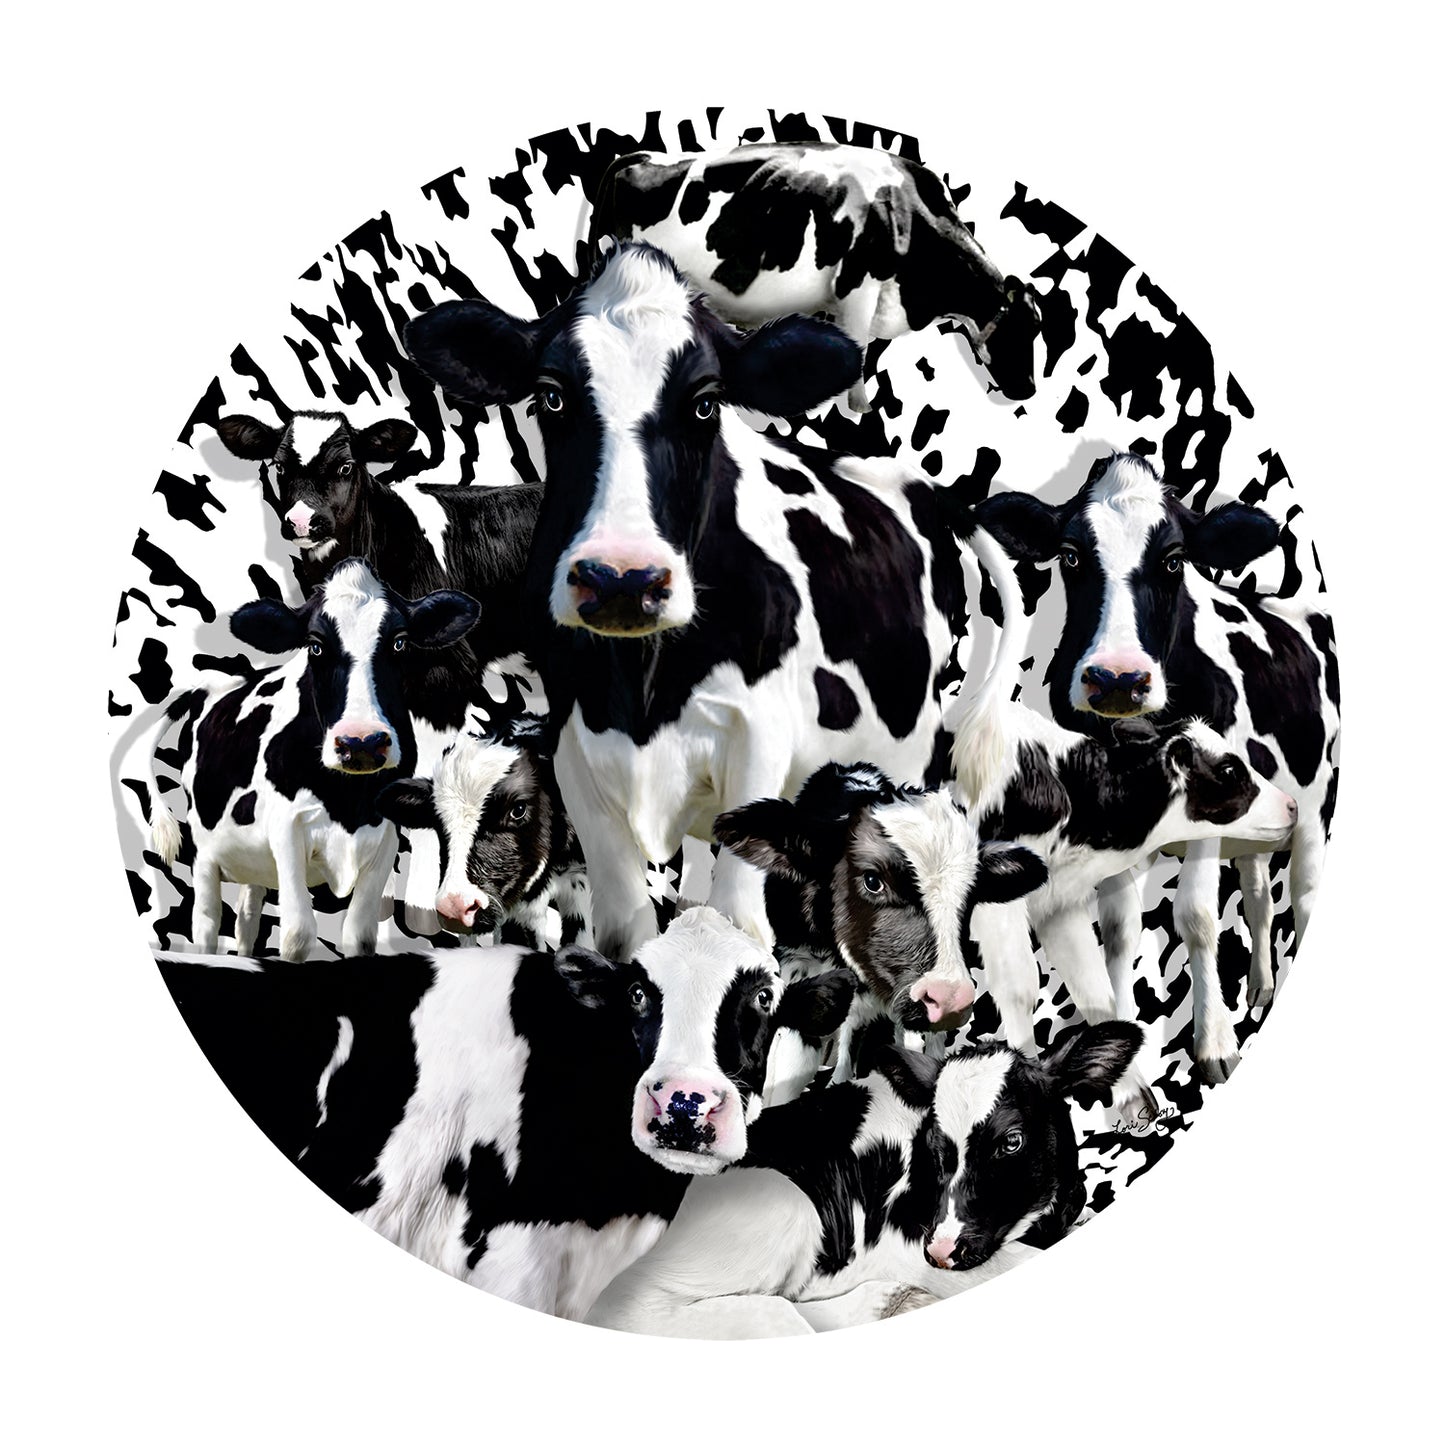 Herd of Cows - 1000 Piece Jigsaw Puzzle